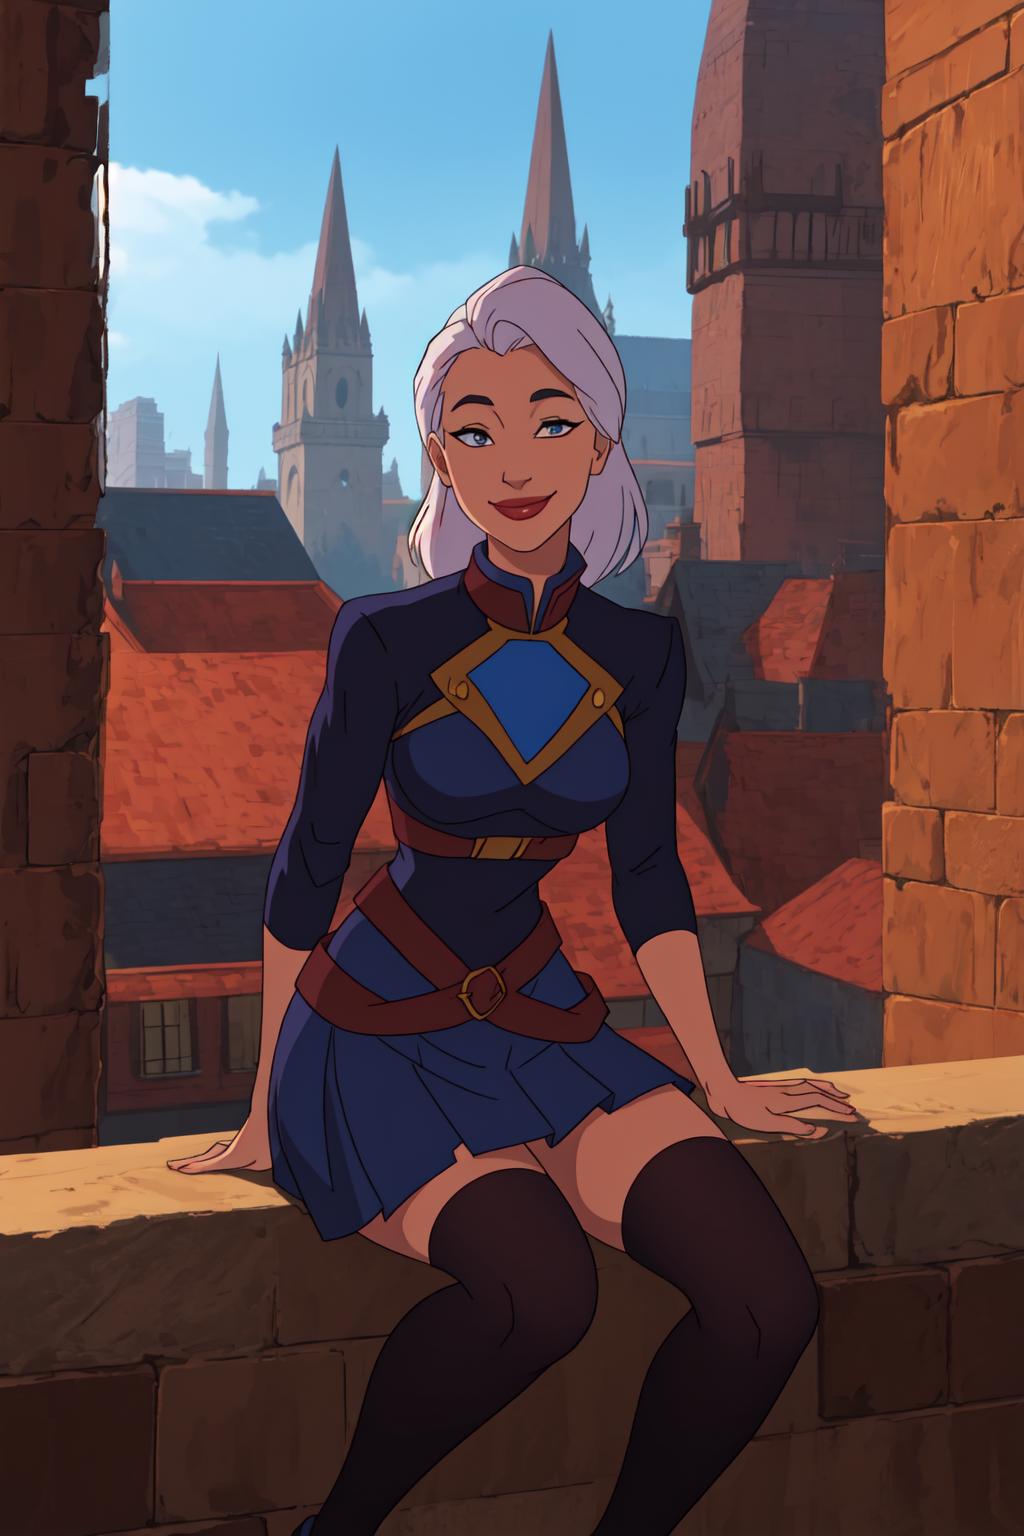 A cartoon woman in a blue dress and socks with a city in the background.